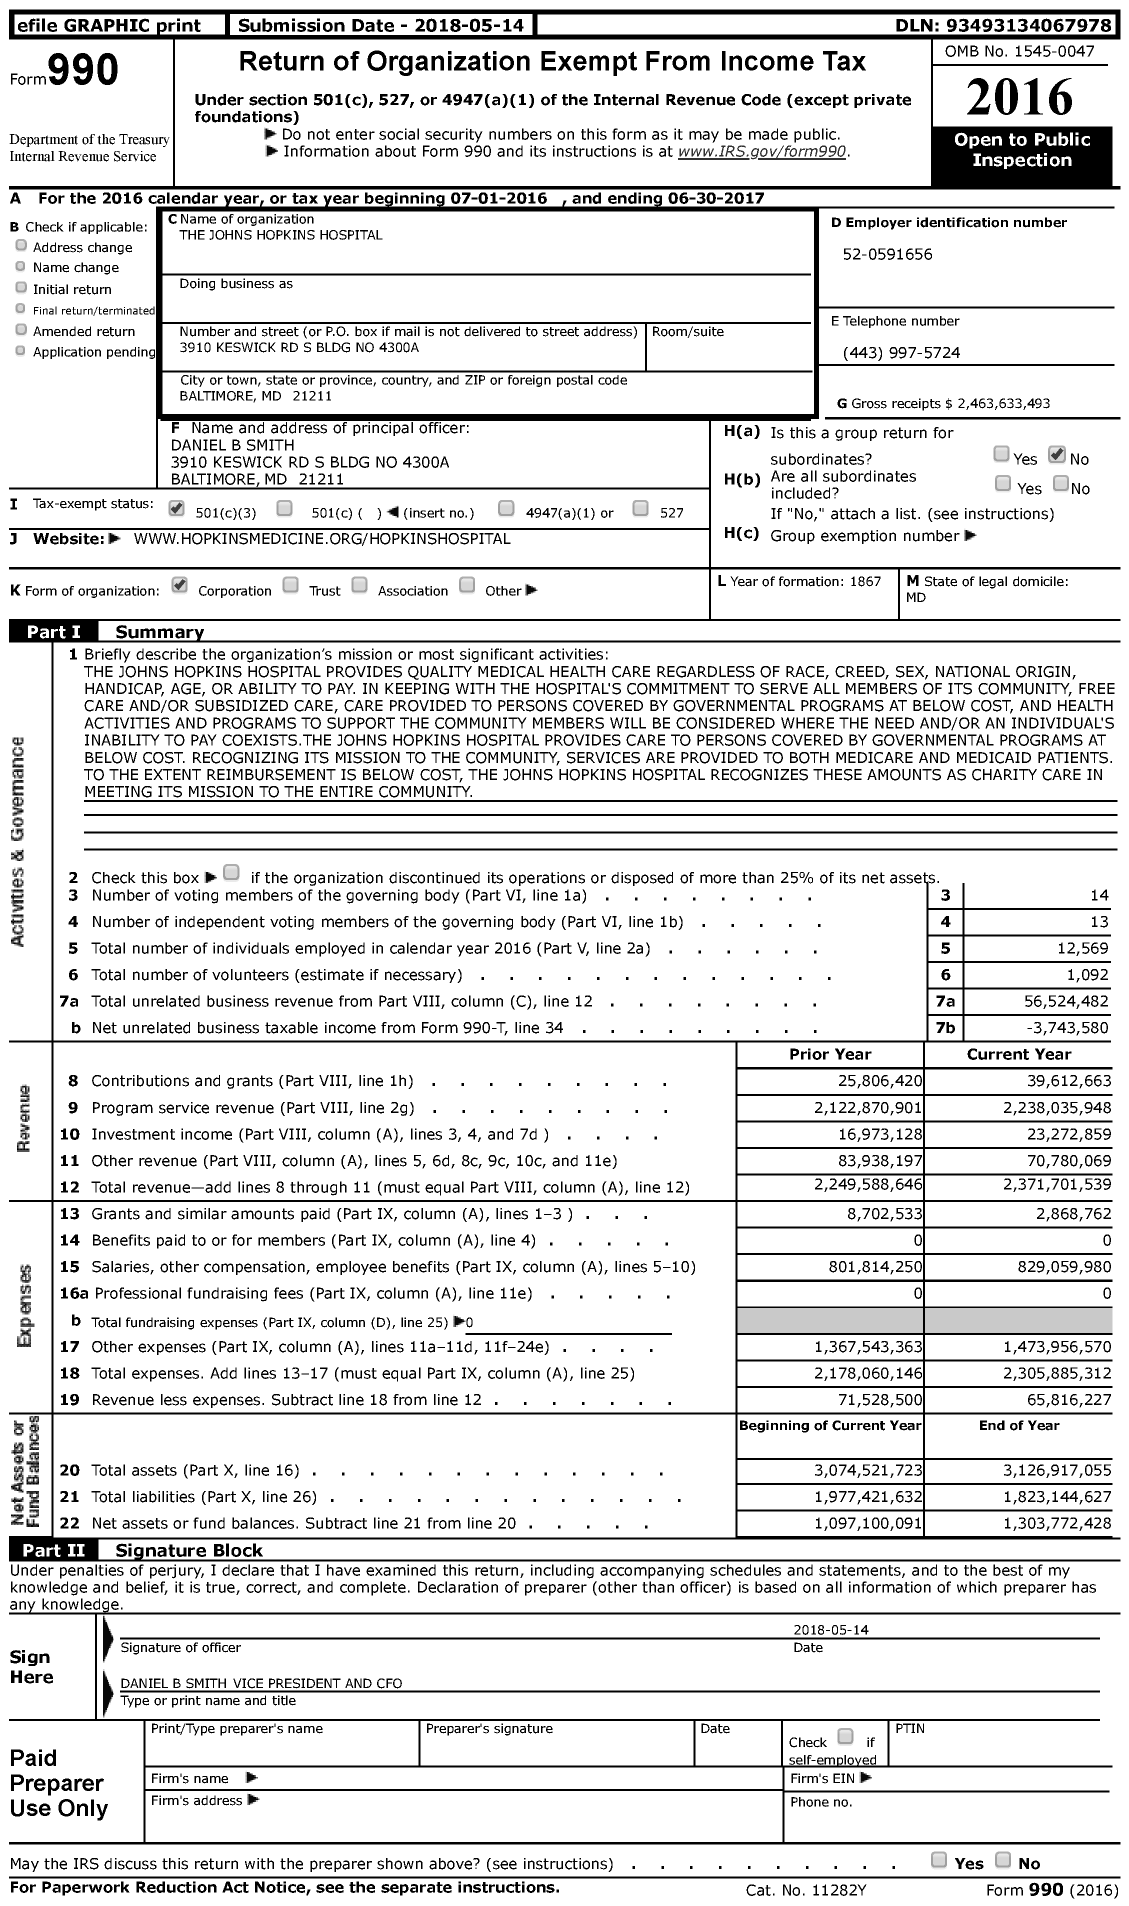 Image of first page of 2016 Form 990 for The Johns Hopkins Hospital (JHH)